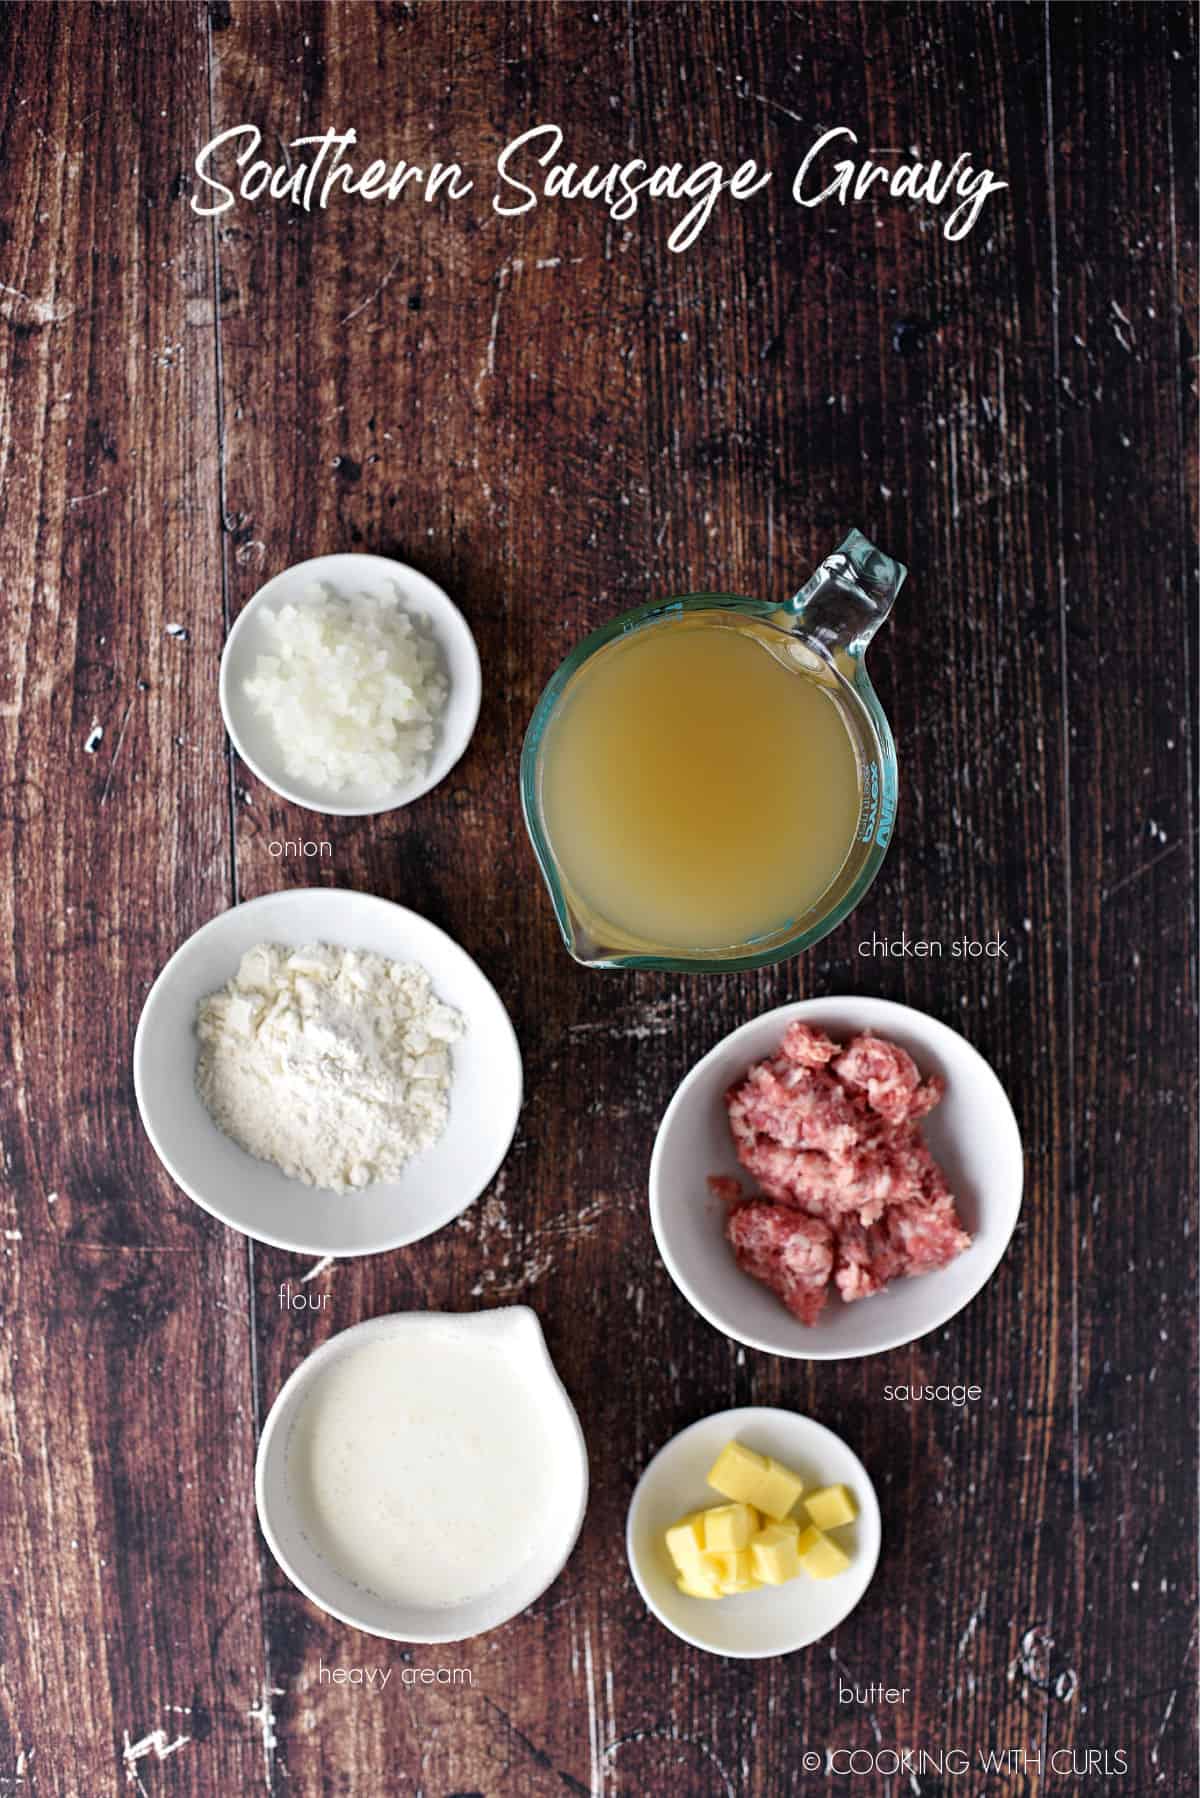 looking down on the ingredients needed to make southern sausage gravy; onion, flour, heavy cream, butter, sausage and chicken stock. 